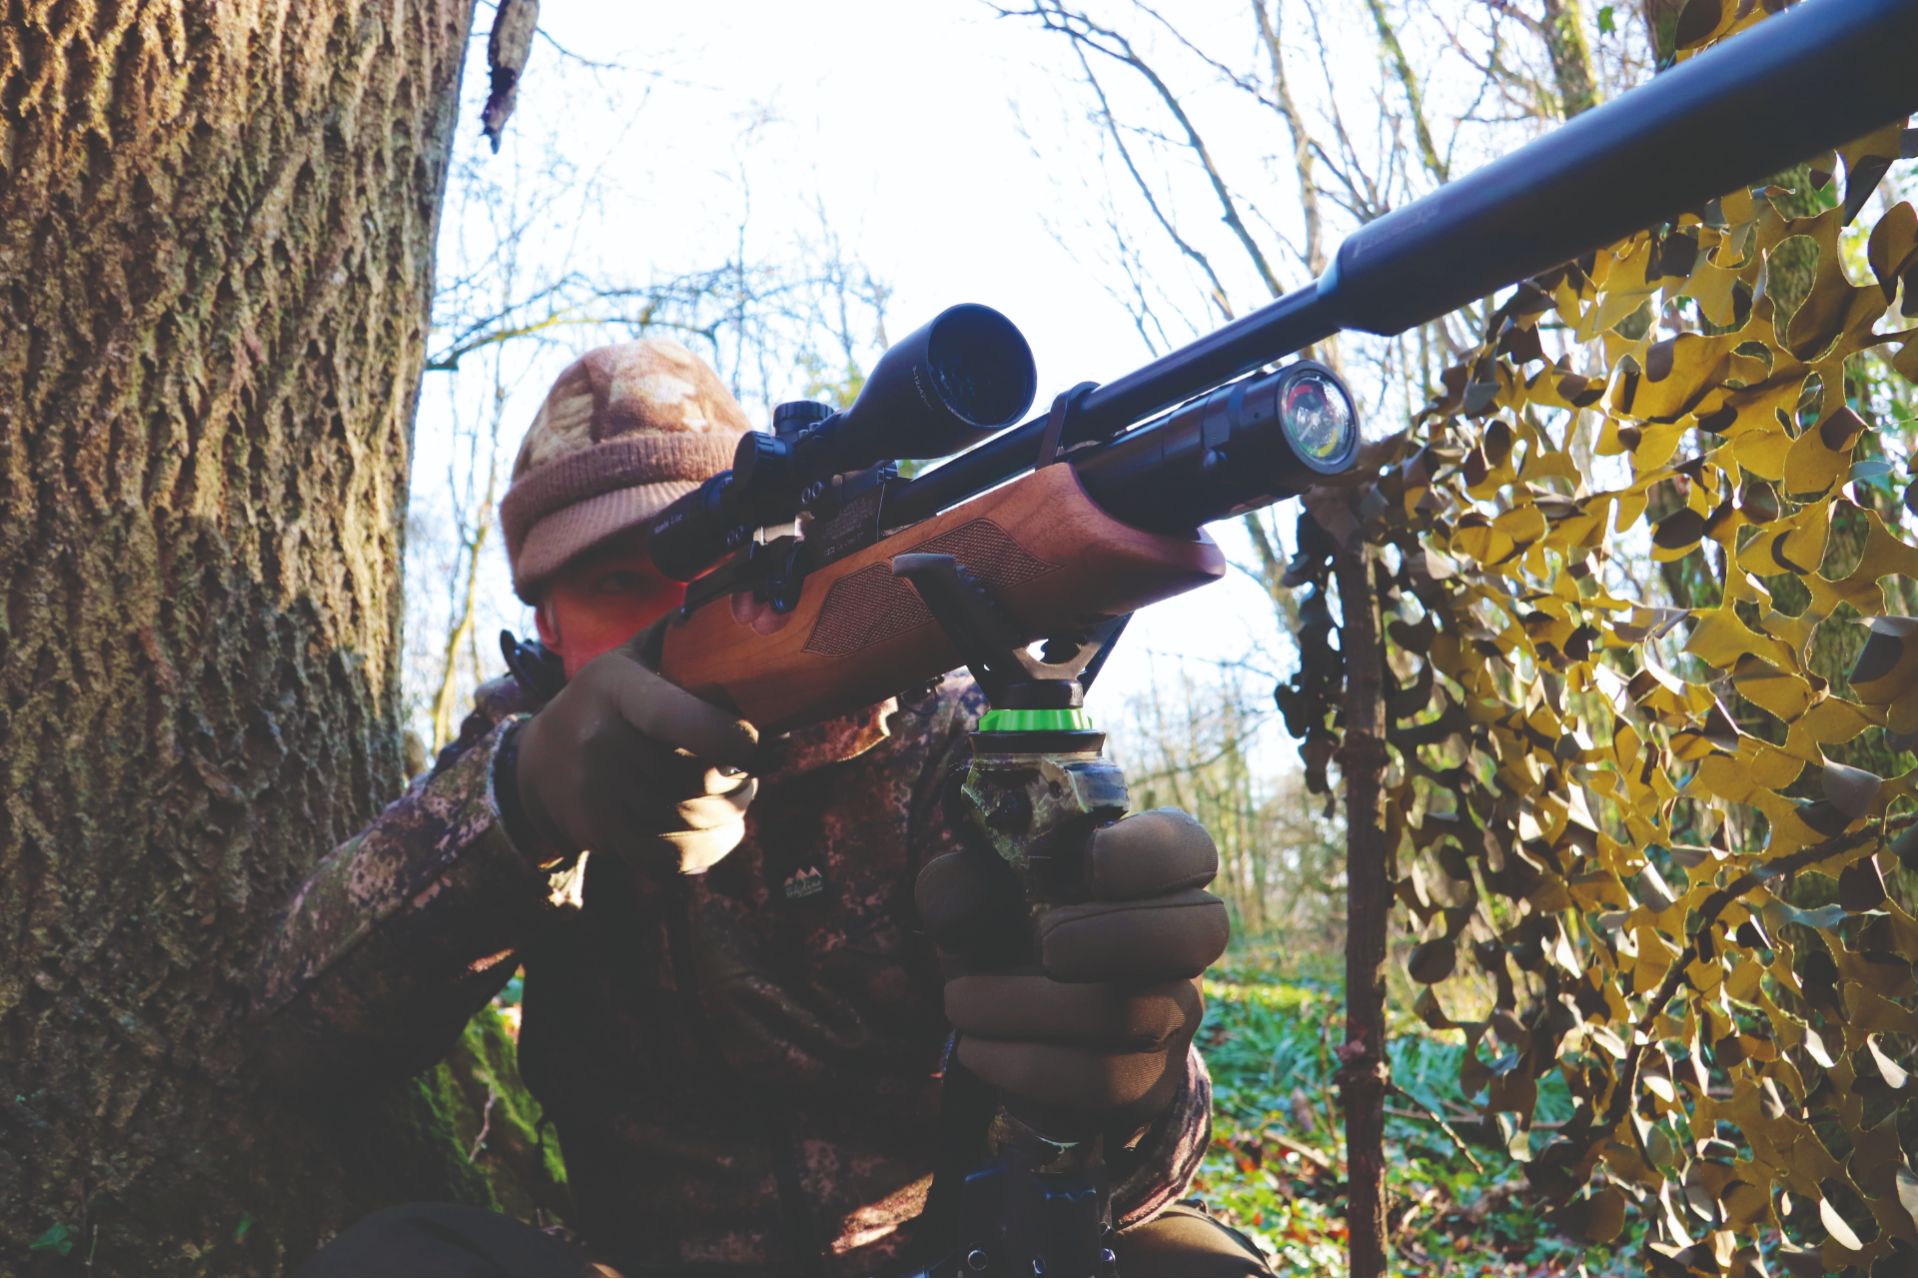 Mat Manning shooting his air rifle from a hide